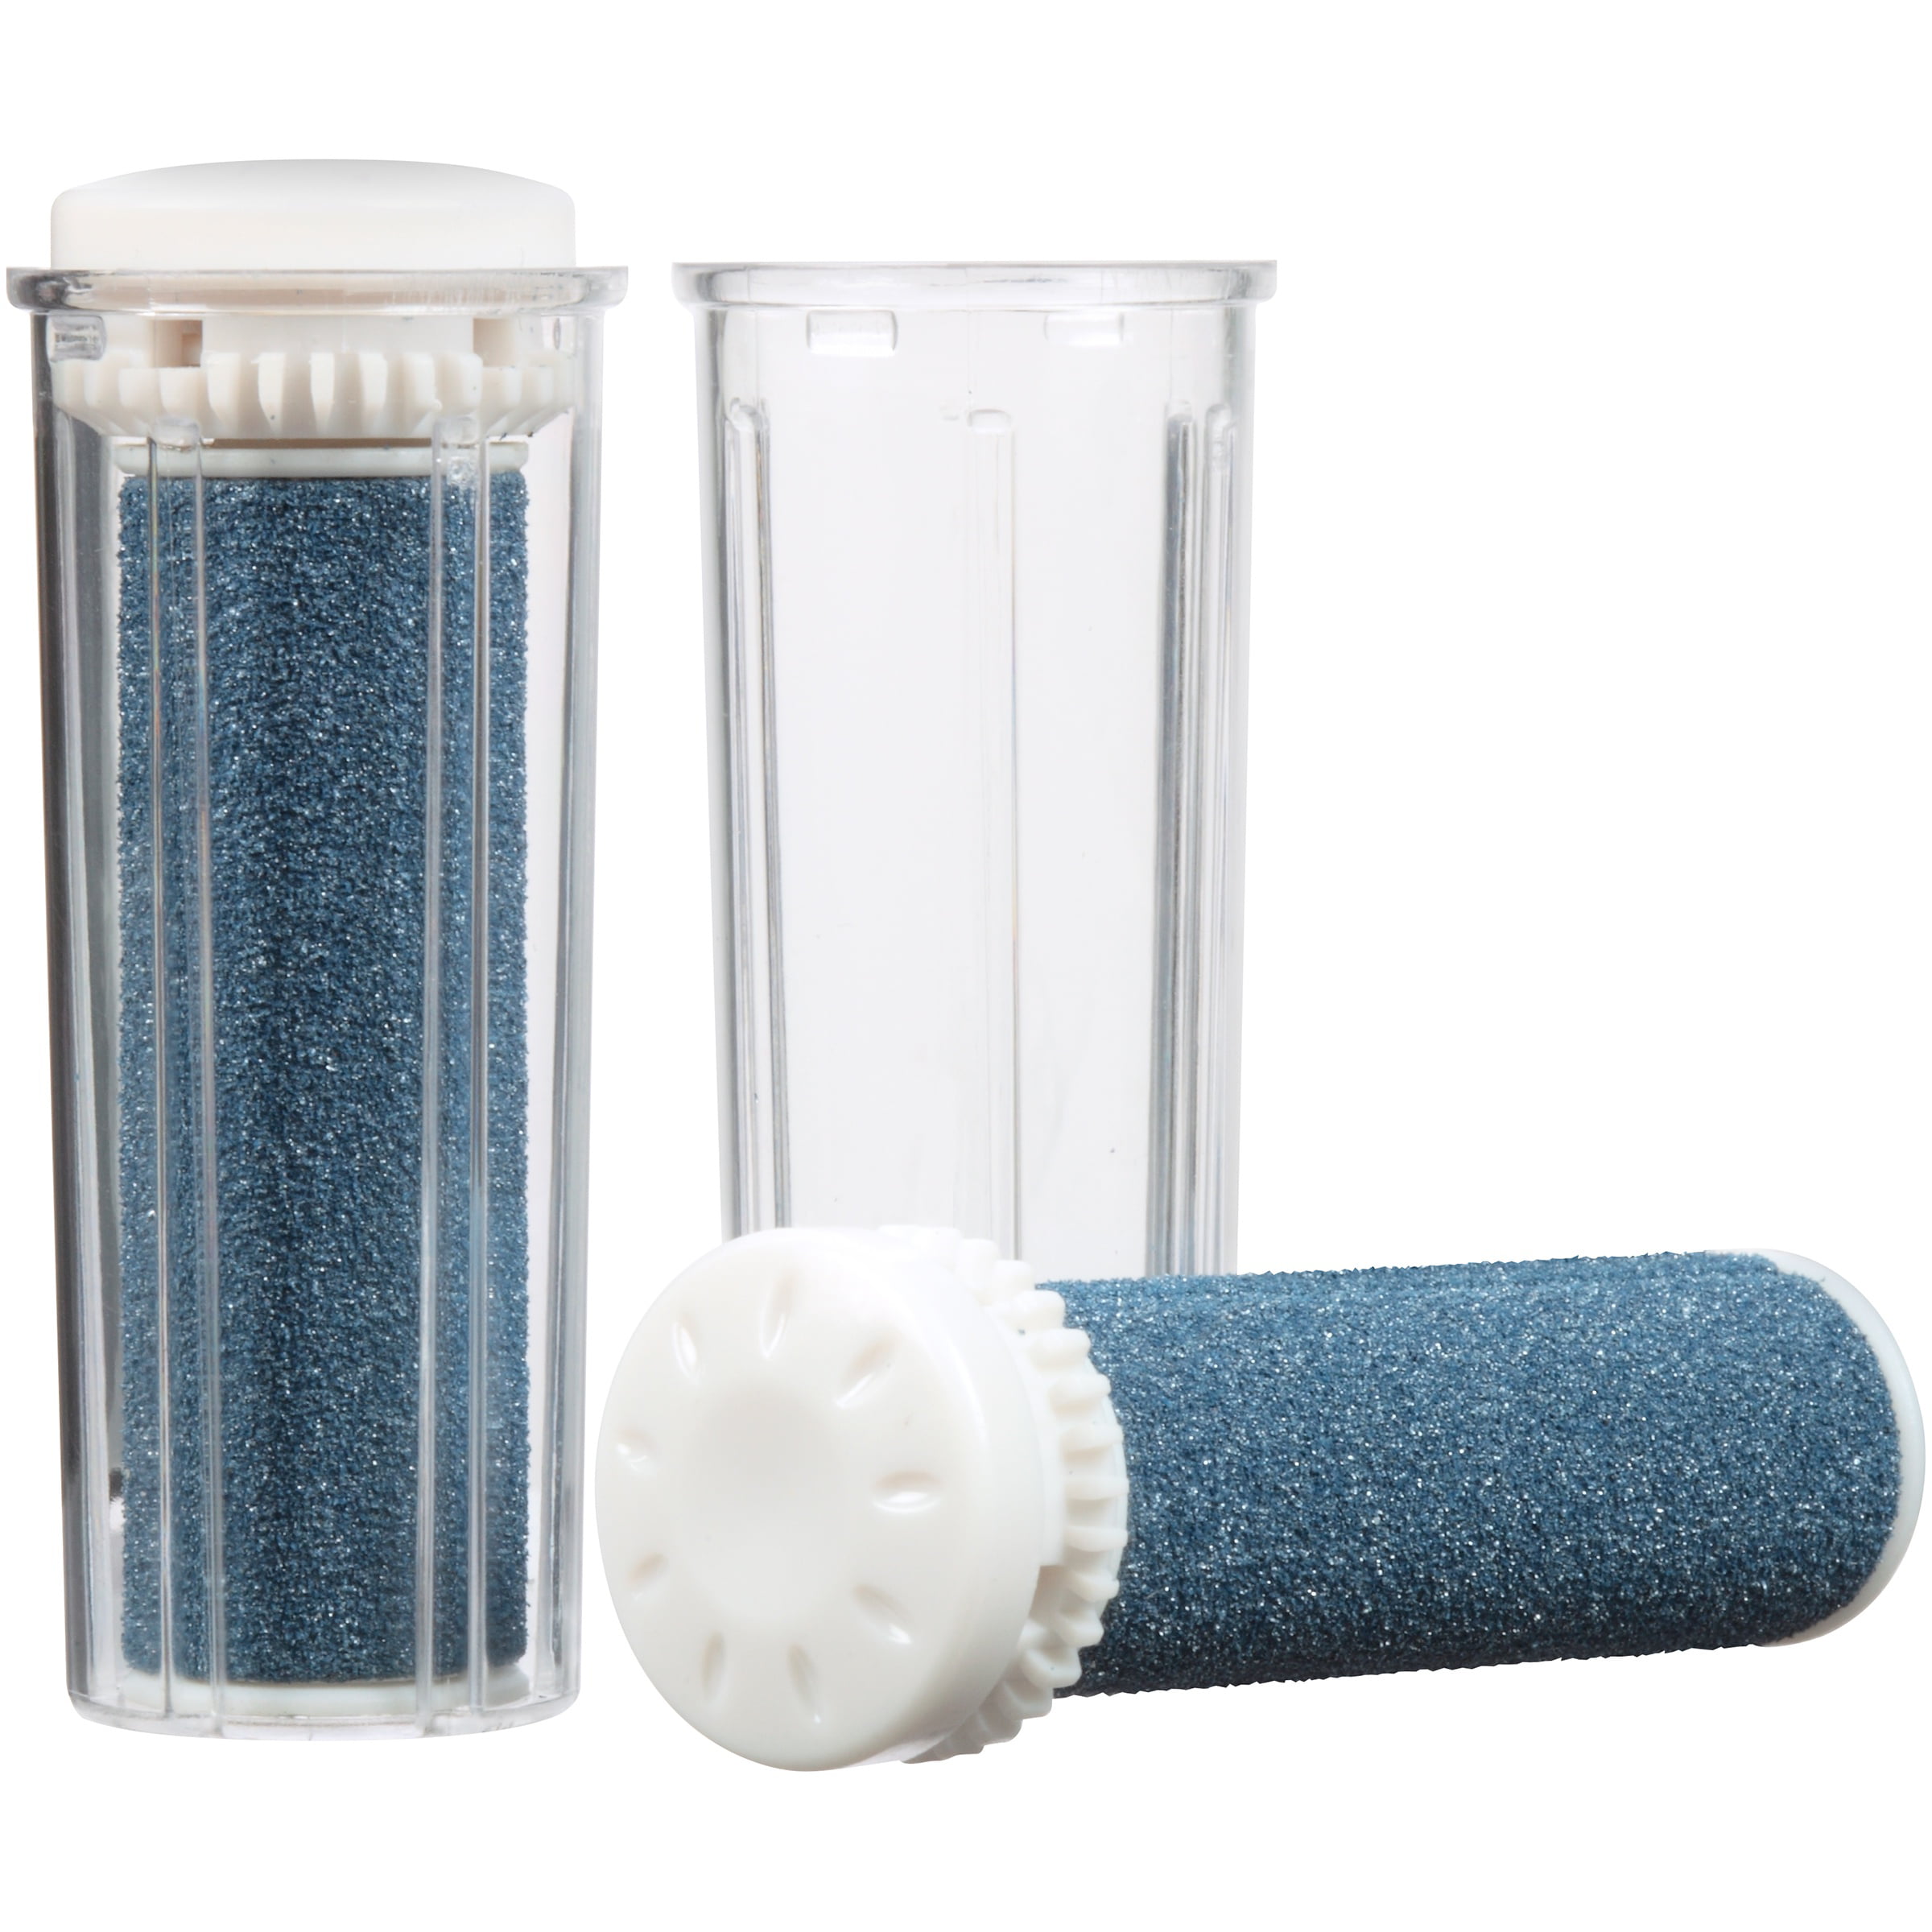 dr scholl's express pedi replacement rollers